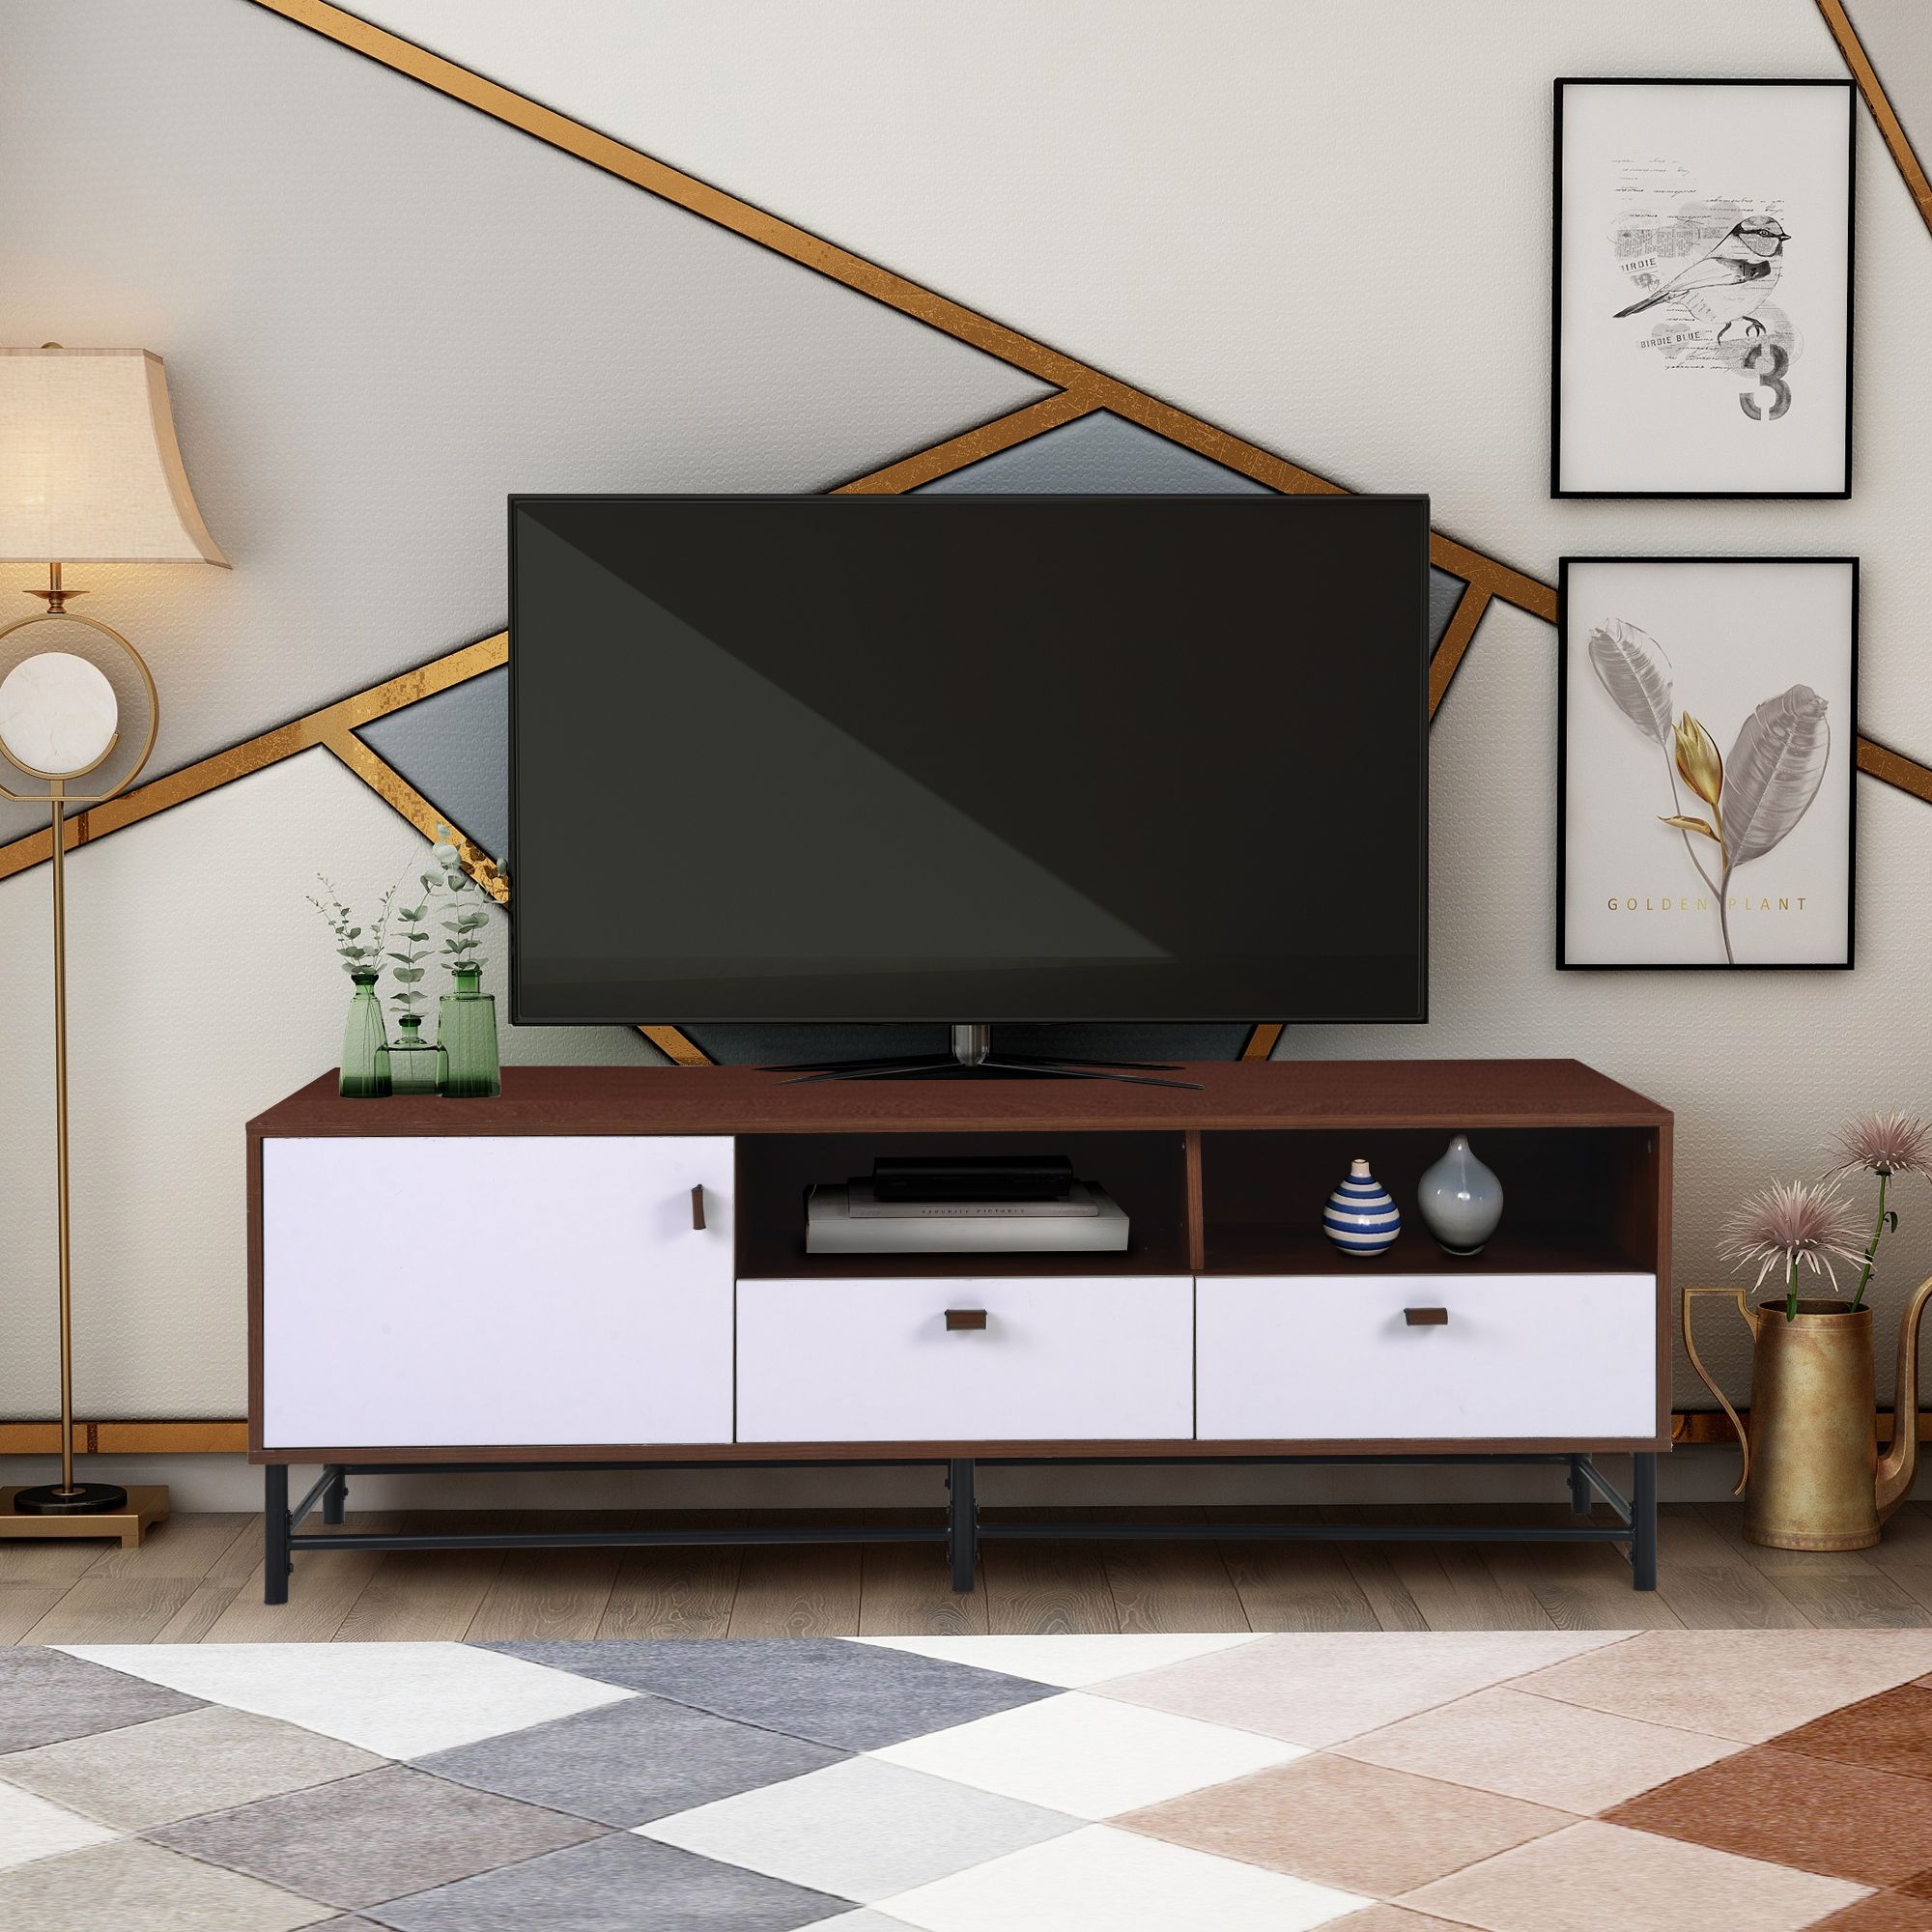 Modern Tv Stand, Wood Tv Table For Tvs' Up To 65 Inches With Regard To Metal And Wood Tv Stands (View 7 of 15)